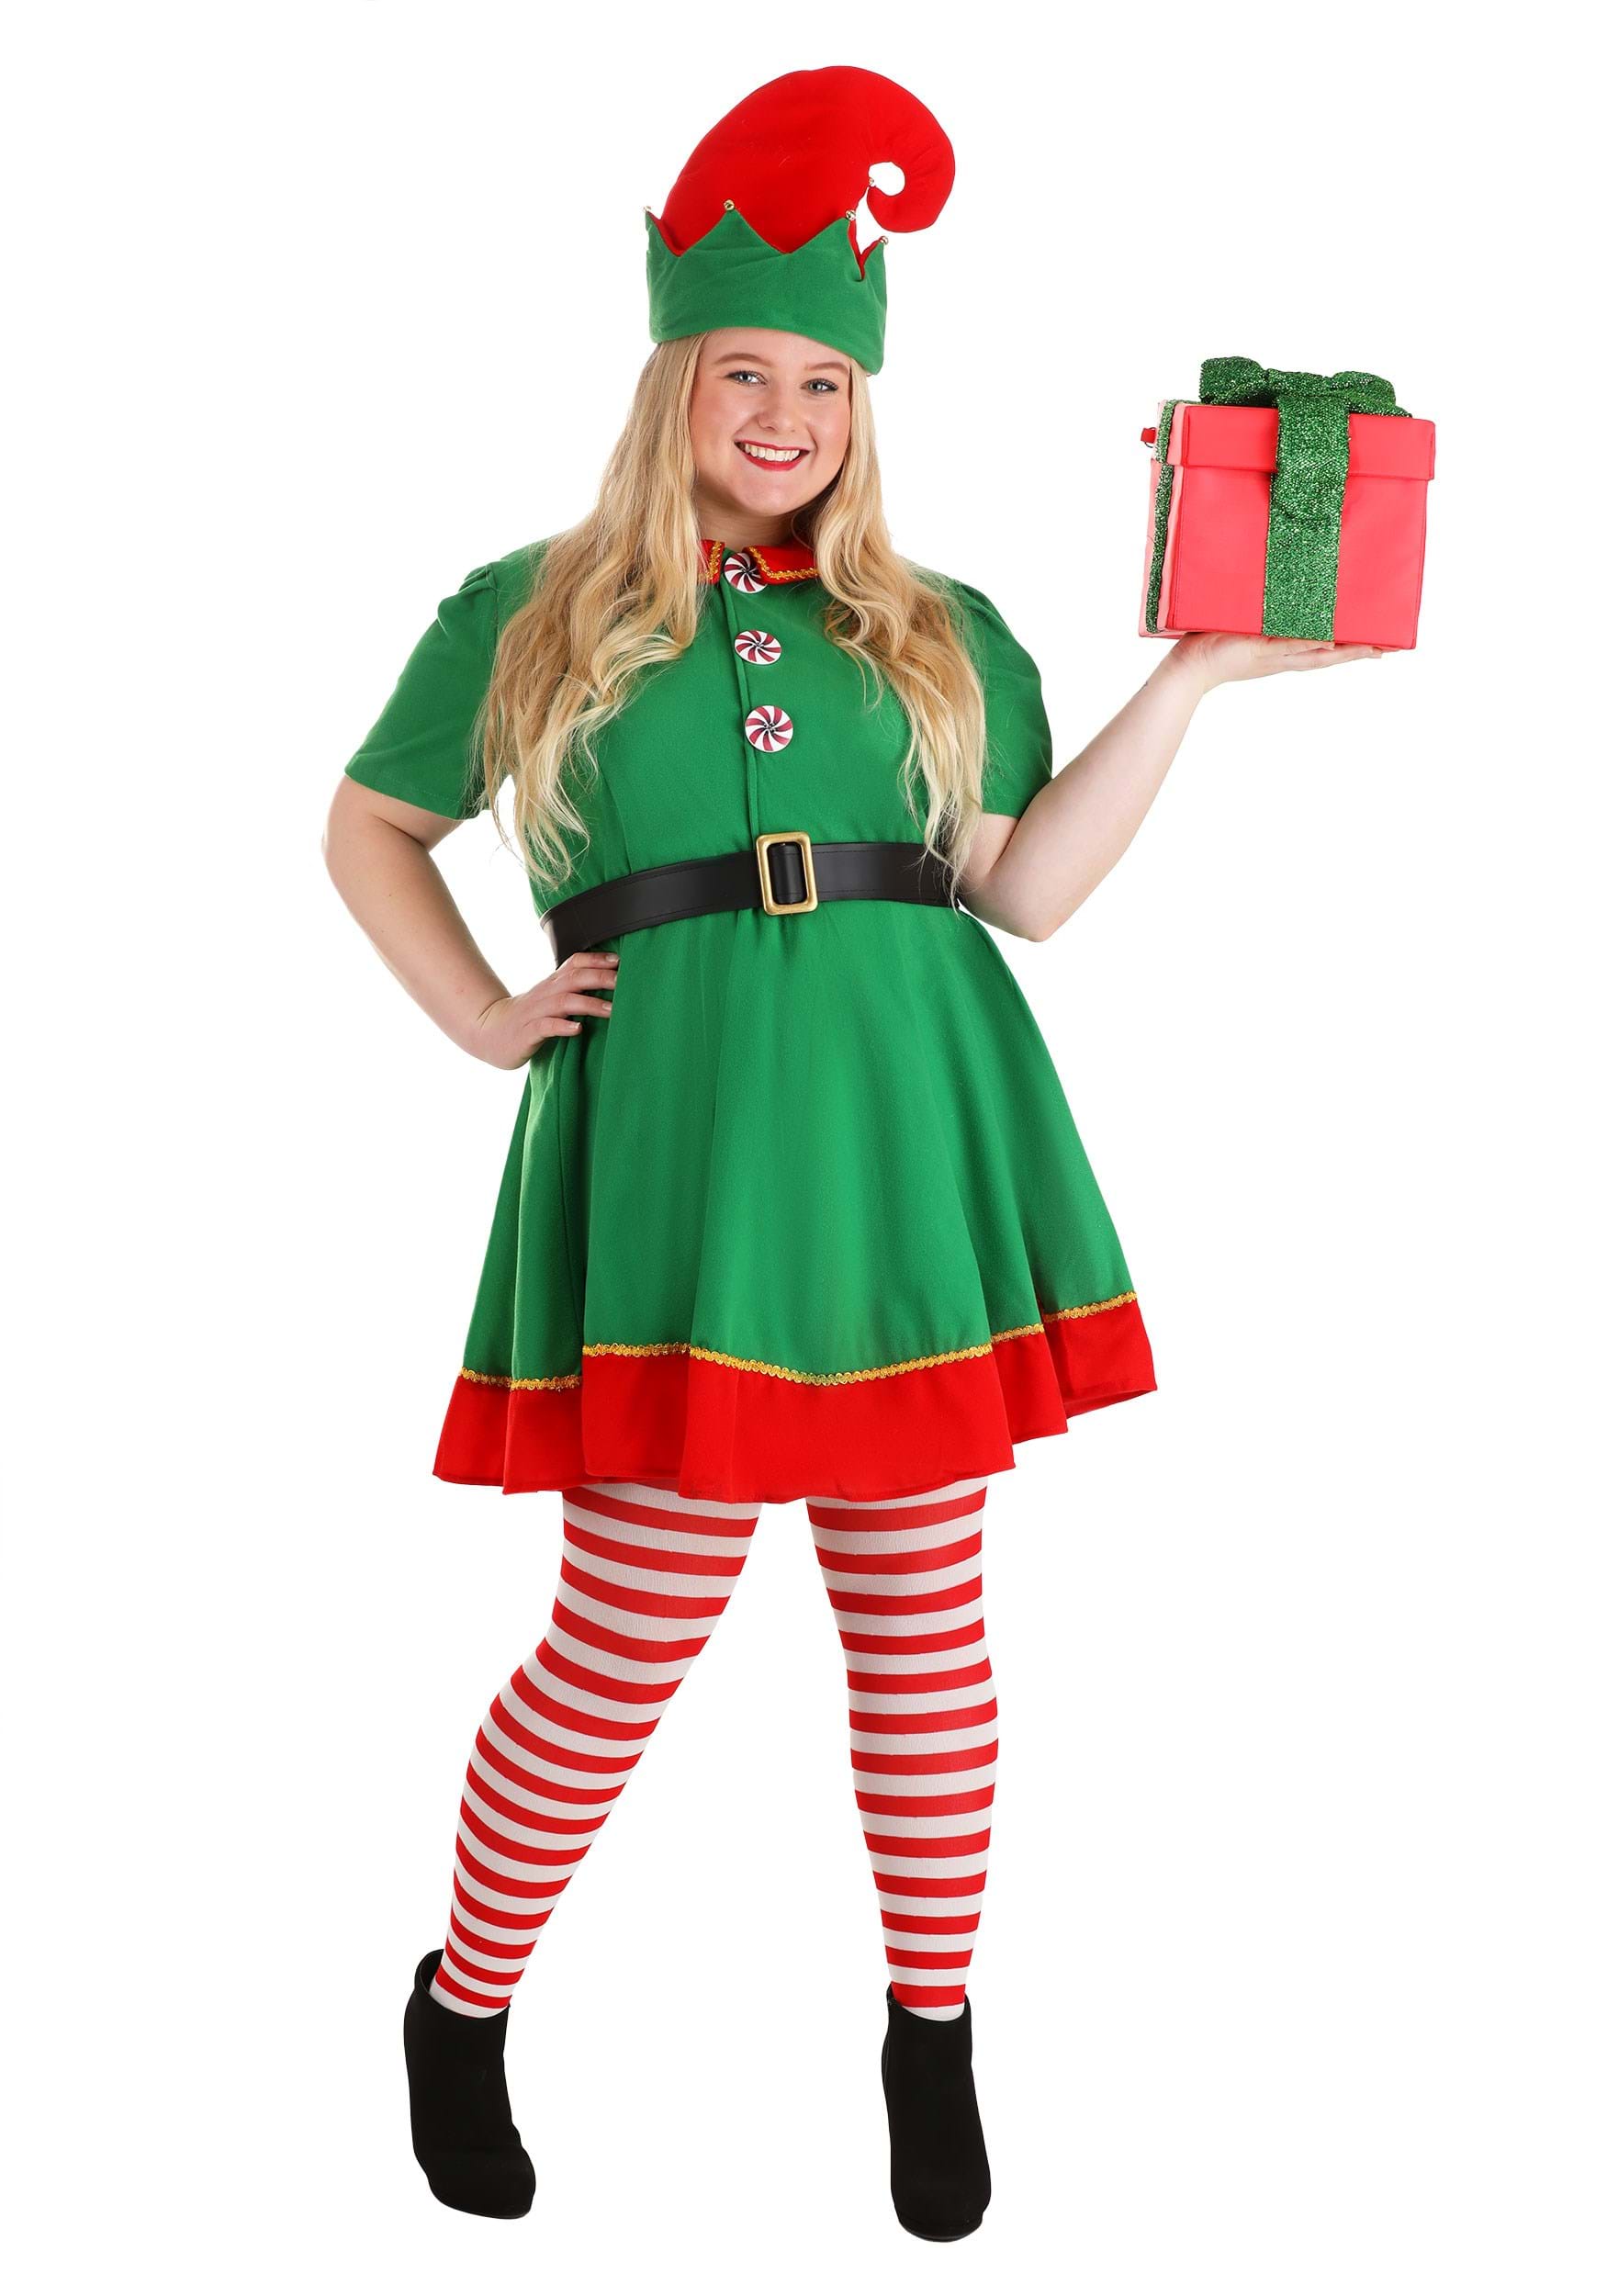 Photos - Fancy Dress Holiday FUN Costumes Plus Size  Elf Costume for Women Green/Red FUN2177 